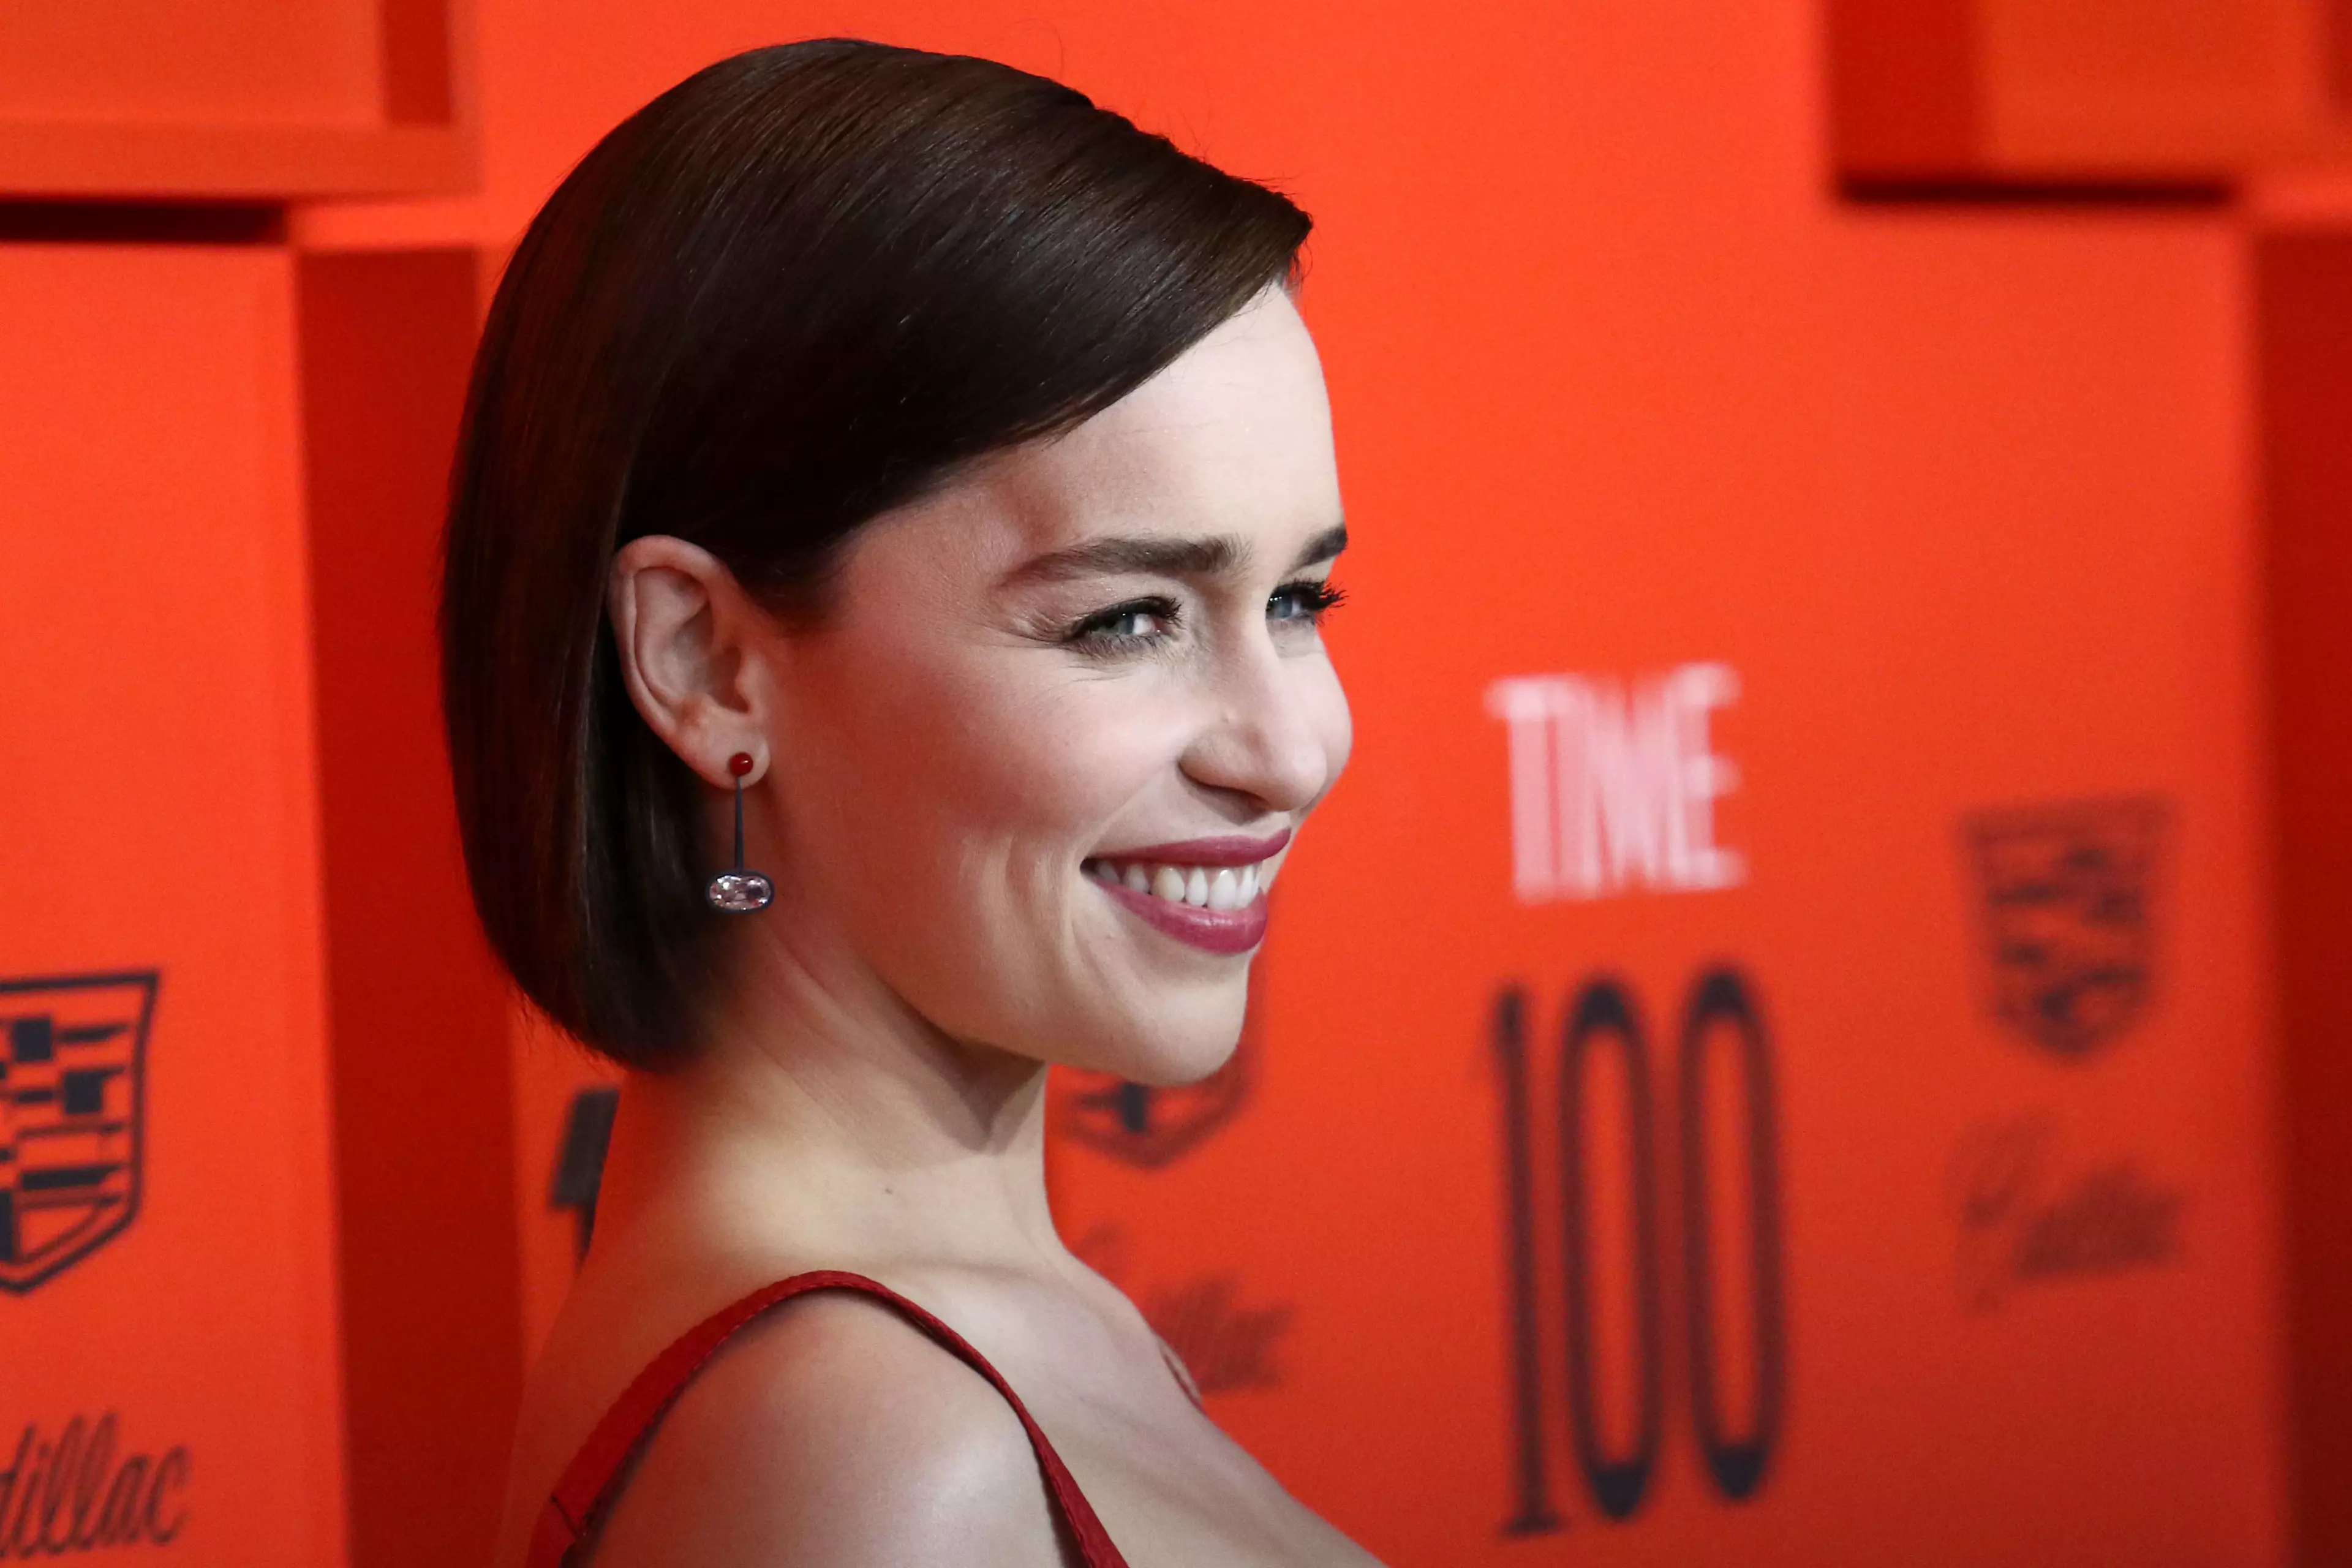 Emilia Clarke said the end of the show left her feeling numb.